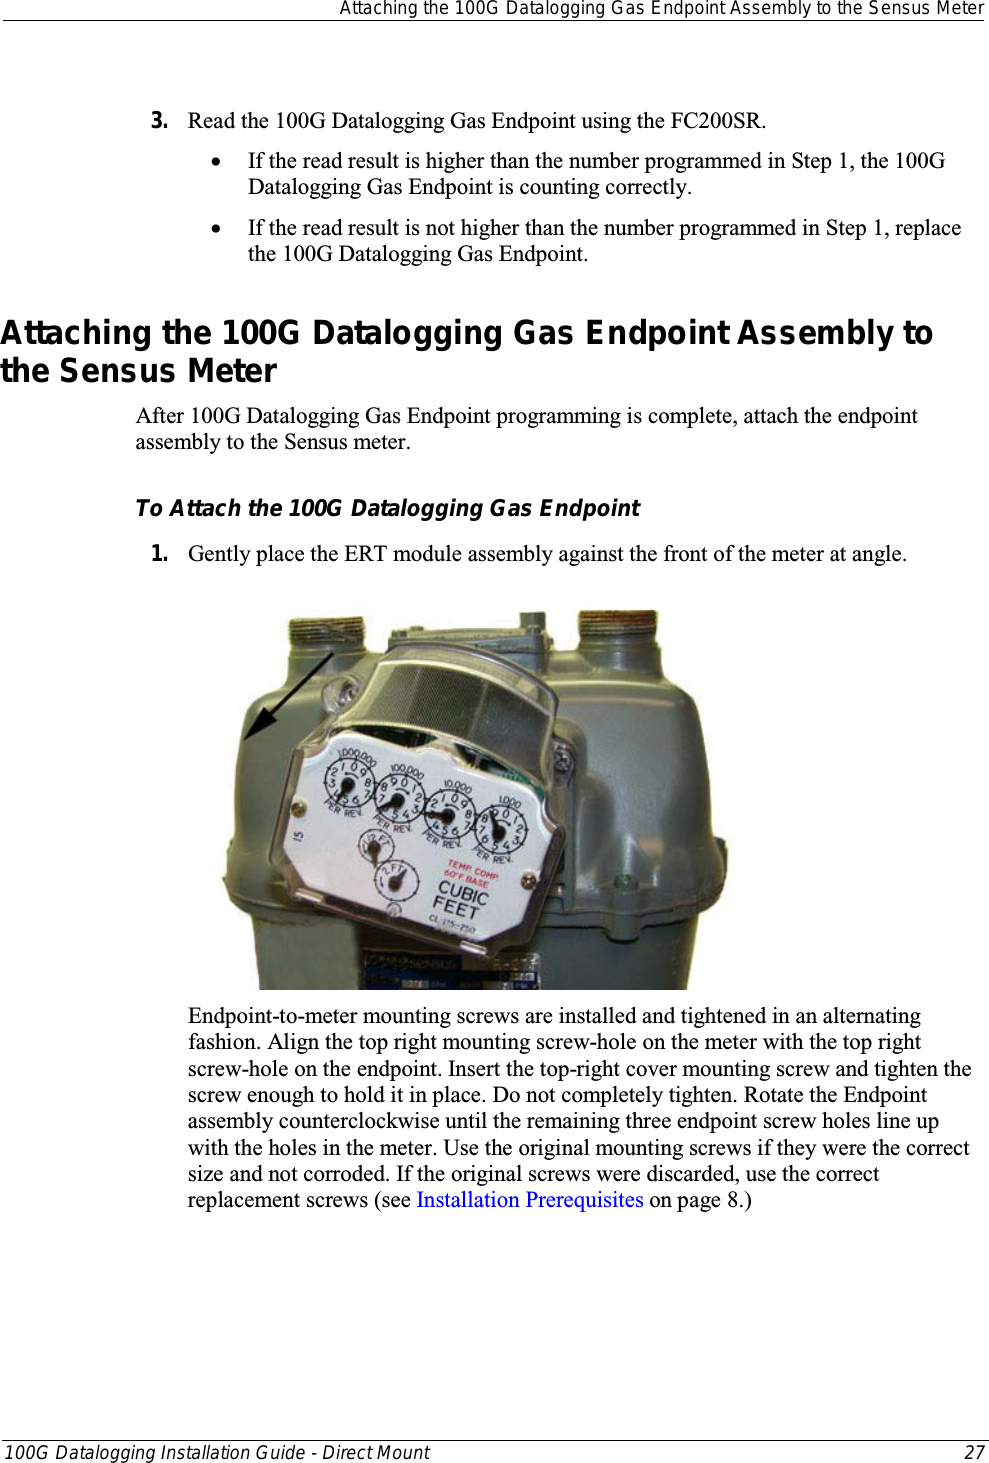  Attaching the 100G Datalogging Gas Endpoint Assembly to the Sensus Meter  100G Datalogging Installation Guide - Direct Mount 27   3. Read the 100G Datalogging Gas Endpoint using the FC200SR.  • If the read result is higher than the number programmed in Step 1, the 100G Datalogging Gas Endpoint is counting correctly.  • If the read result is not higher than the number programmed in Step 1, replace the 100G Datalogging Gas Endpoint.  Attaching the 100G Datalogging Gas Endpoint Assembly to the Sensus Meter After 100G Datalogging Gas Endpoint programming is complete, attach the endpoint assembly to the Sensus meter.  To Attach the 100G Datalogging Gas Endpoint 1. Gently place the ERT module assembly against the front of the meter at angle.   Endpoint-to-meter mounting screws are installed and tightened in an alternating fashion. Align the top right mounting screw-hole on the meter with the top right screw-hole on the endpoint. Insert the top-right cover mounting screw and tighten the screw enough to hold it in place. Do not completely tighten. Rotate the Endpoint assembly counterclockwise until the remaining three endpoint screw holes line up with the holes in the meter. Use the original mounting screws if they were the correct size and not corroded. If the original screws were discarded, use the correct replacement screws (see Installation Prerequisites on page 8.)  